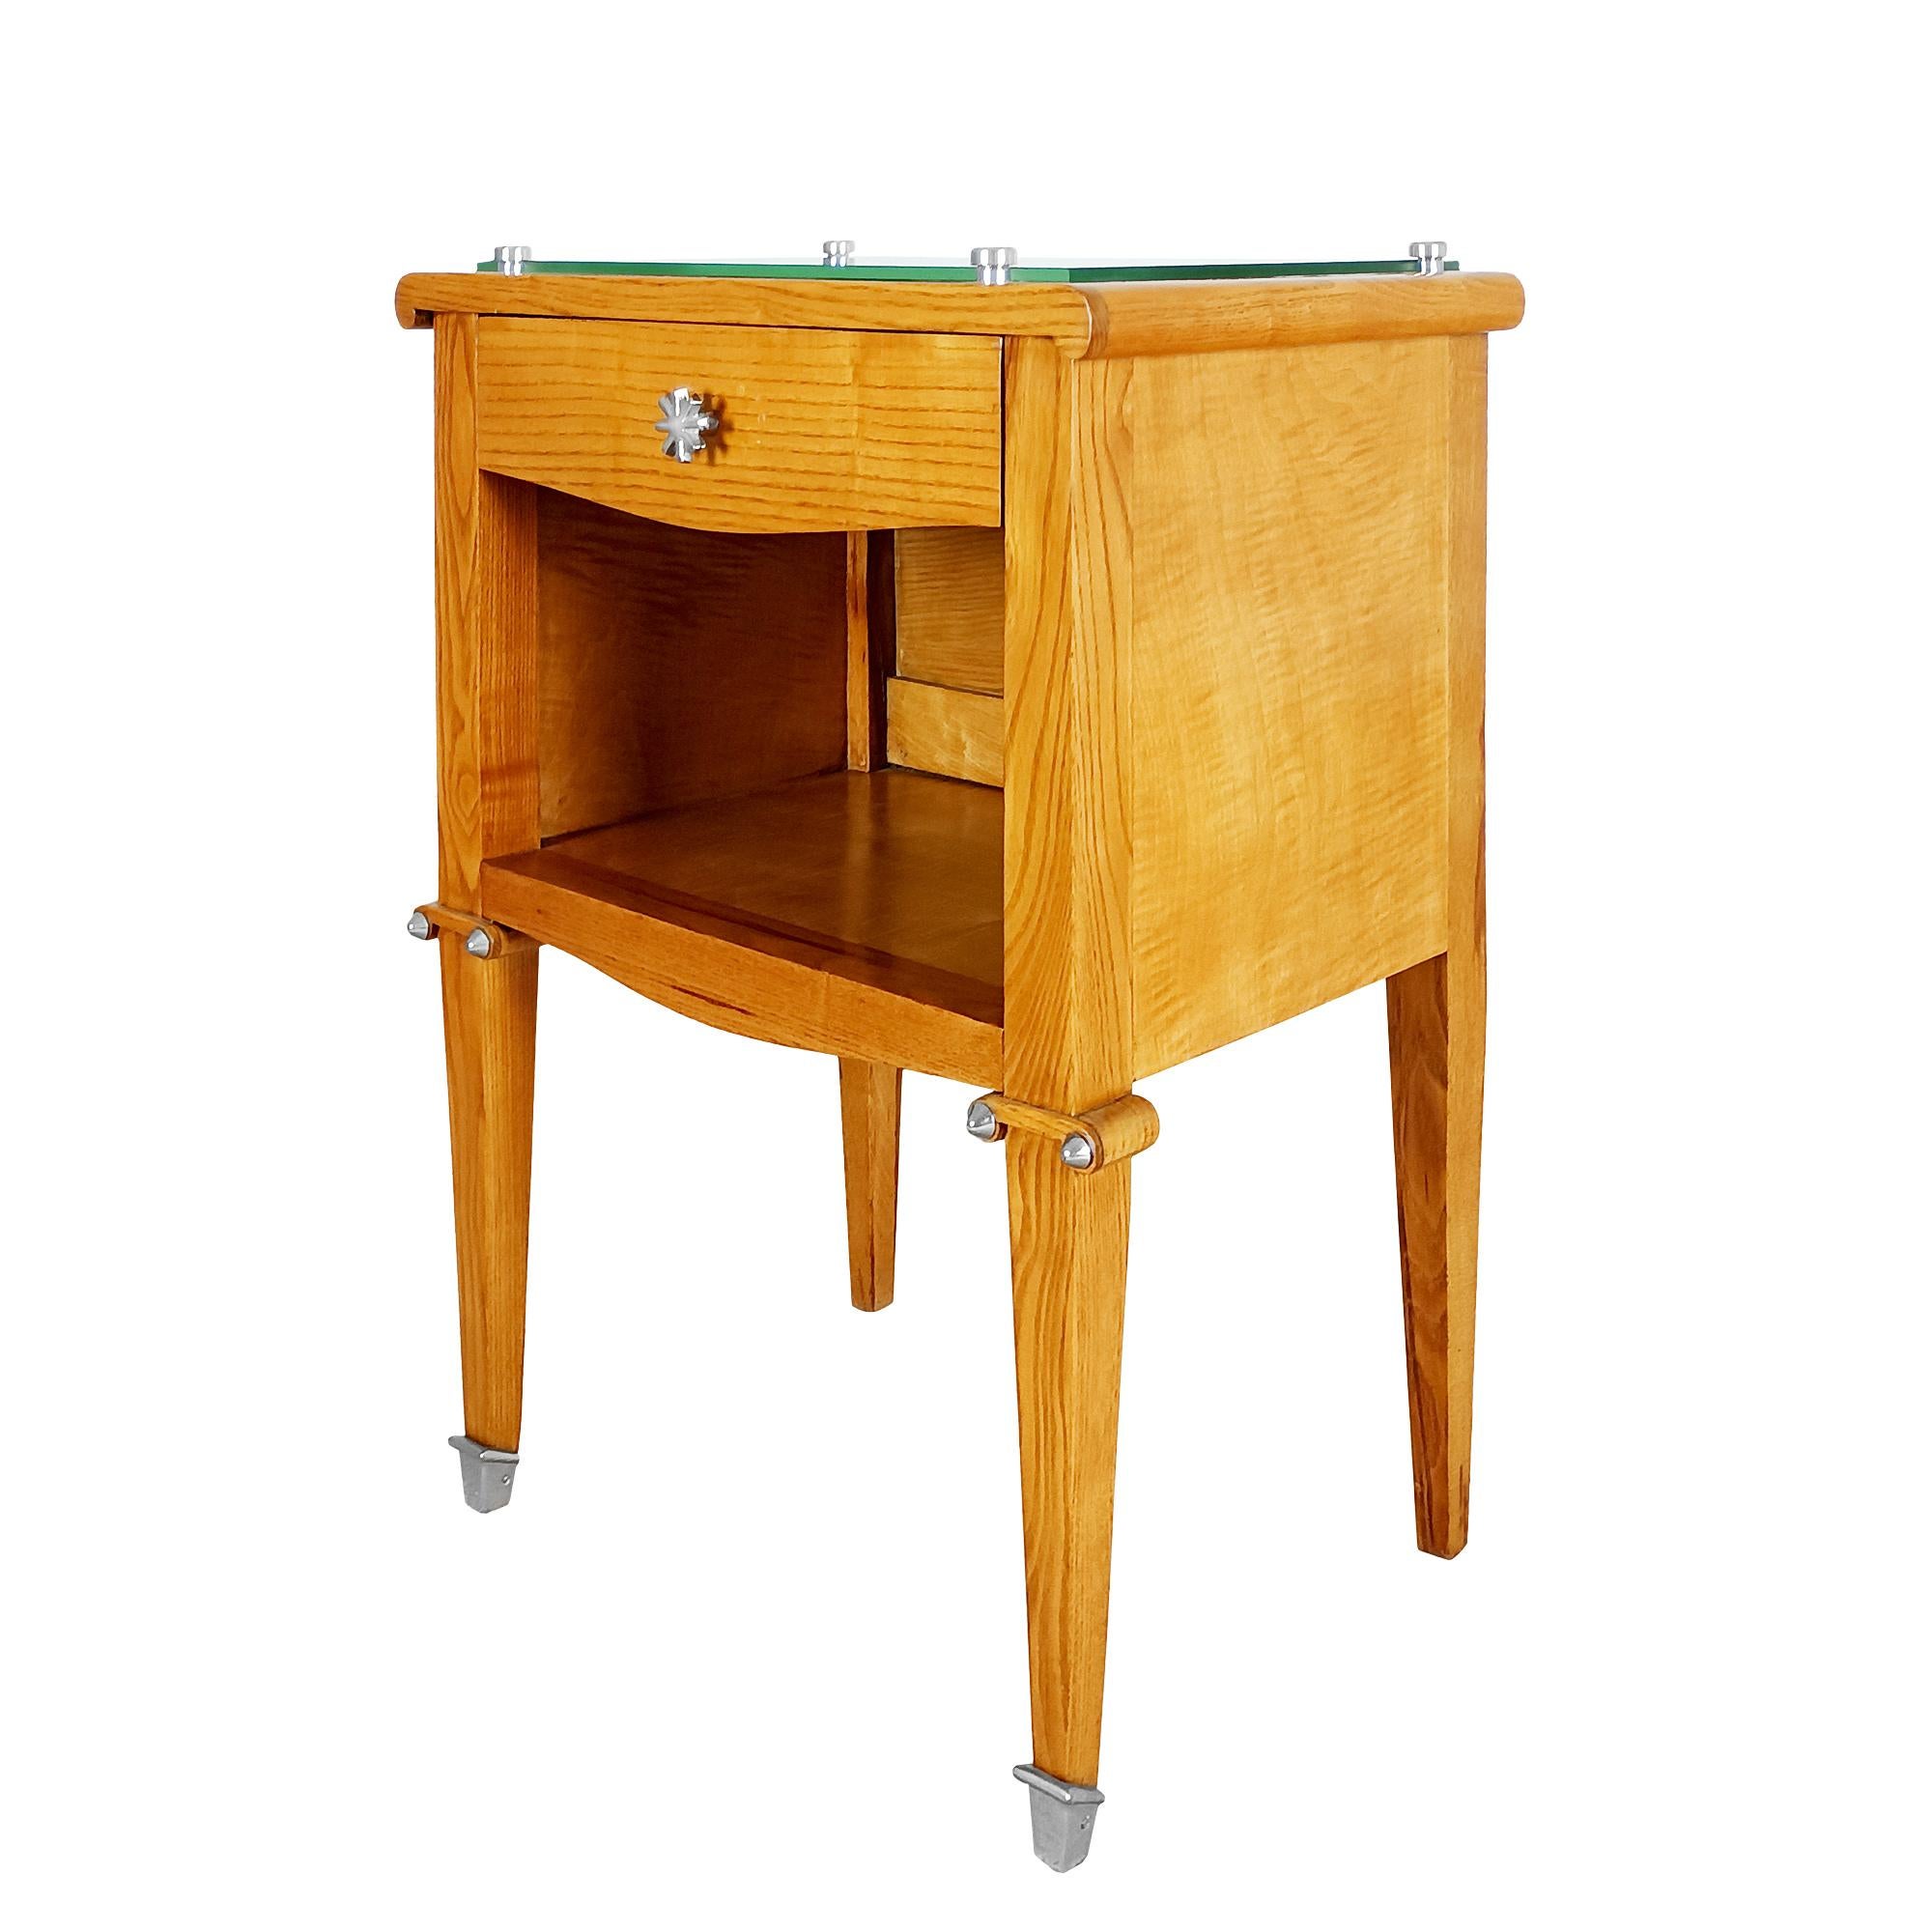 Solid ash with ash veneer bedside table, one drawer above an open niche, top partially covered with a mirror, nickel-plated metal finish, feet and handles. French polish.

France circa 1940